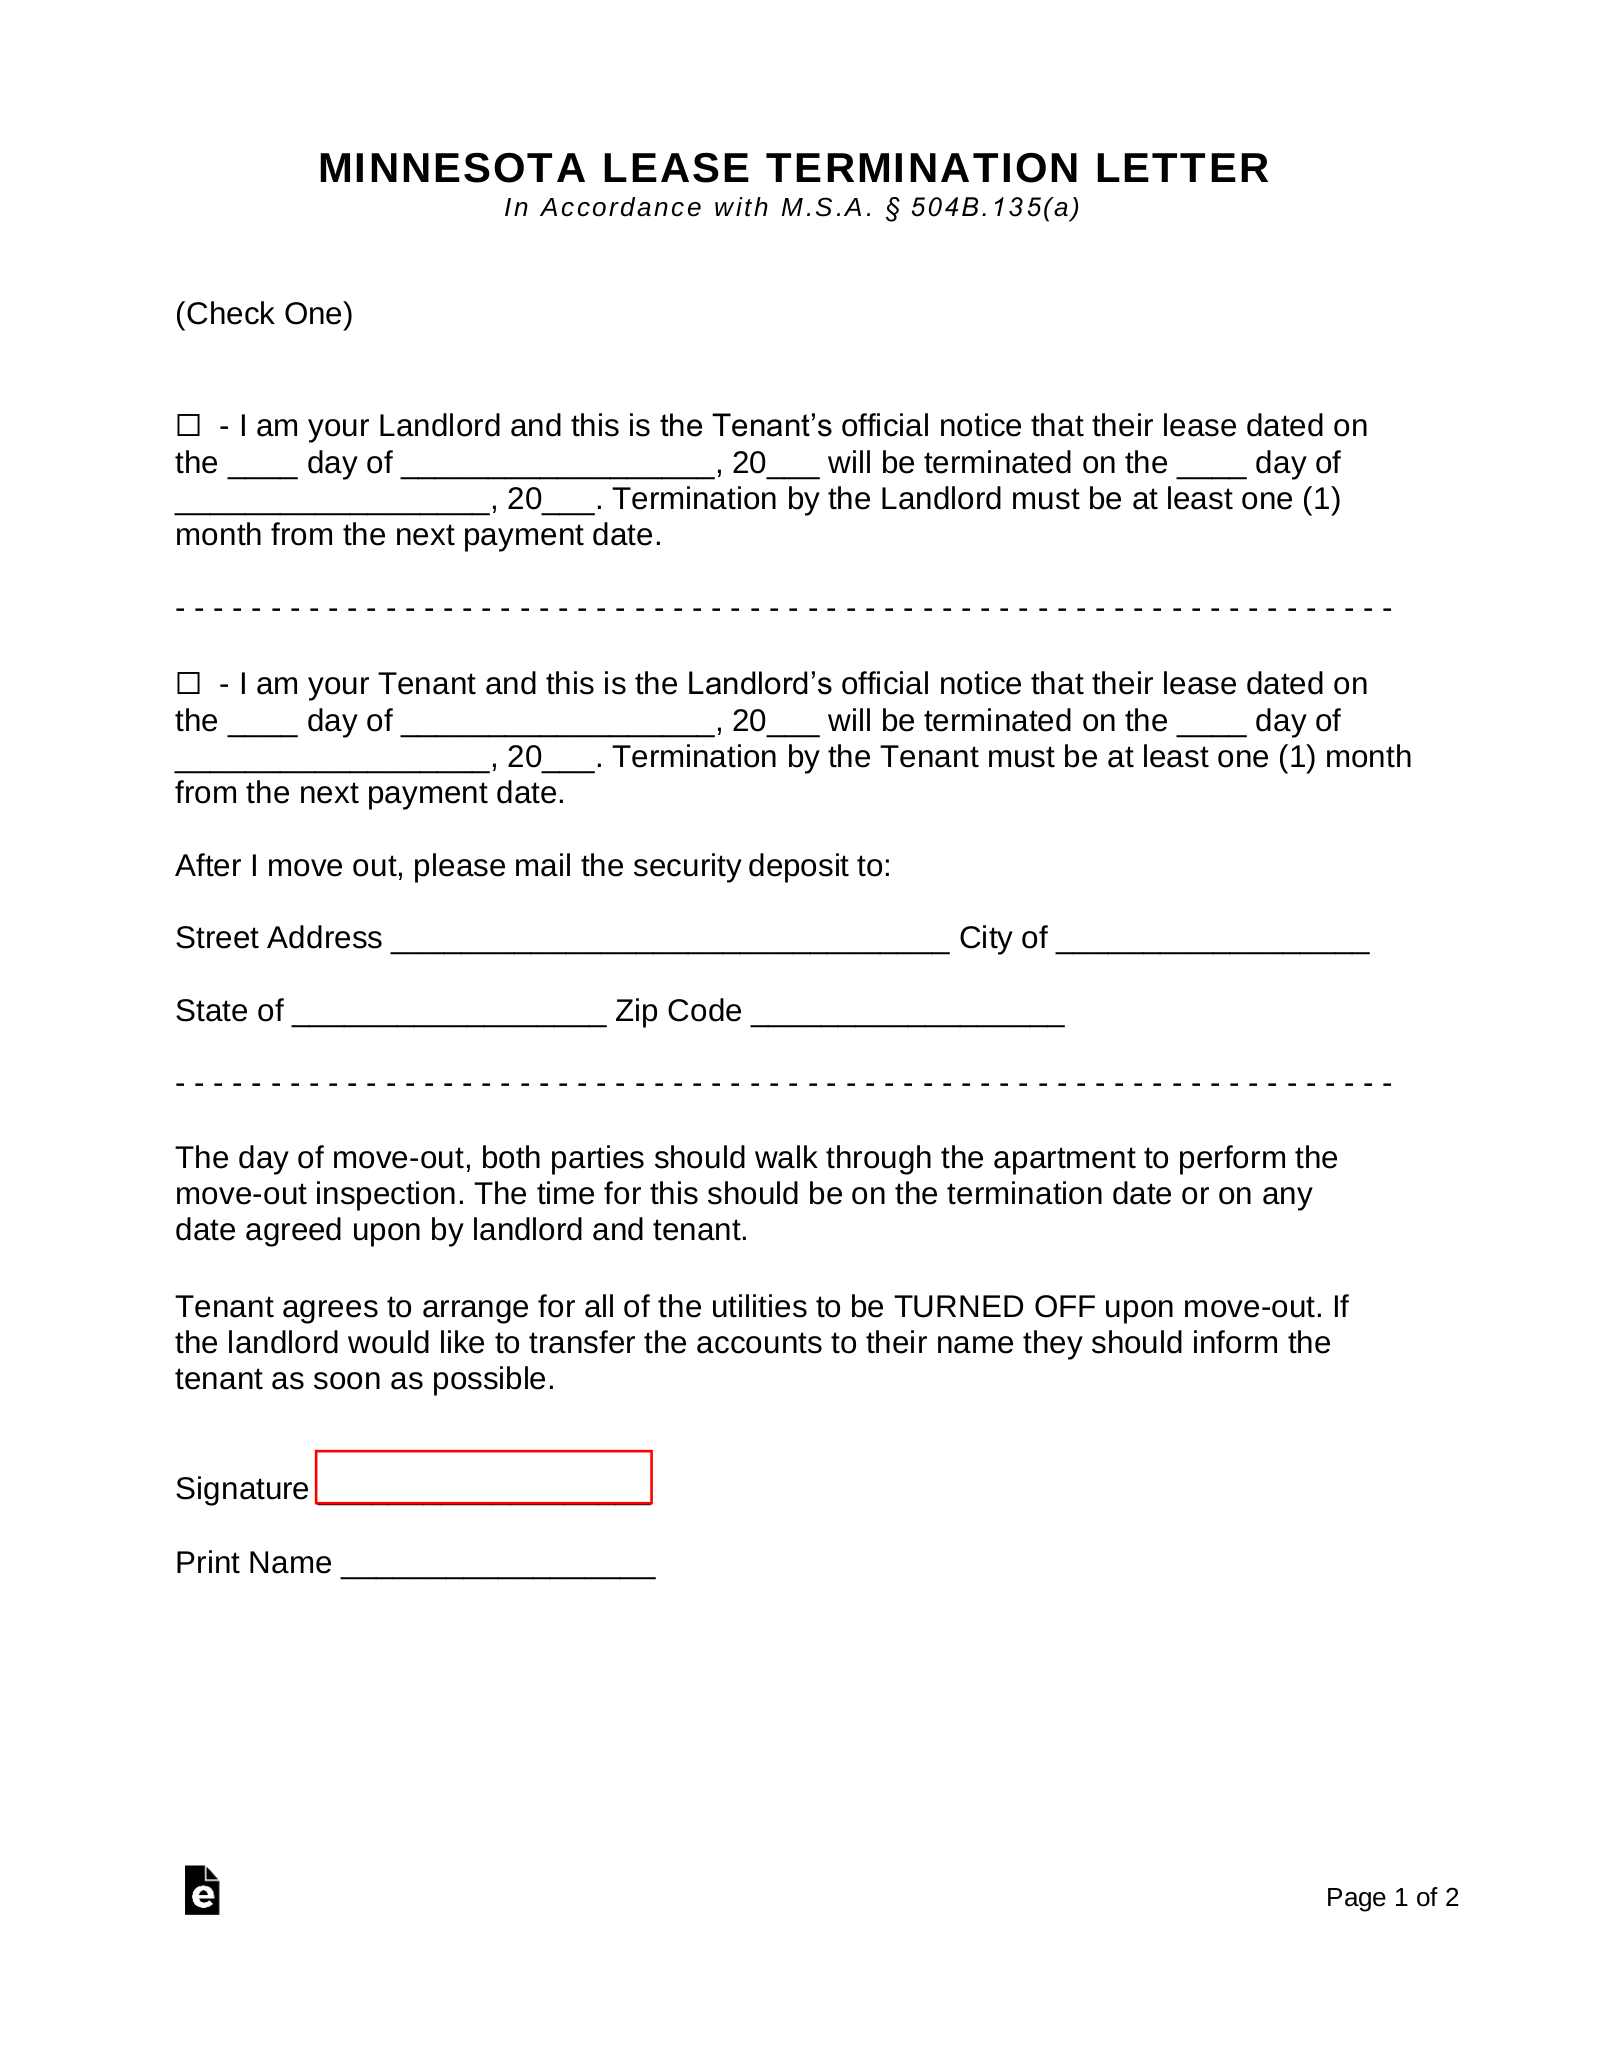 Minnesota Lease Termination Letter Form | 30-Day Notice